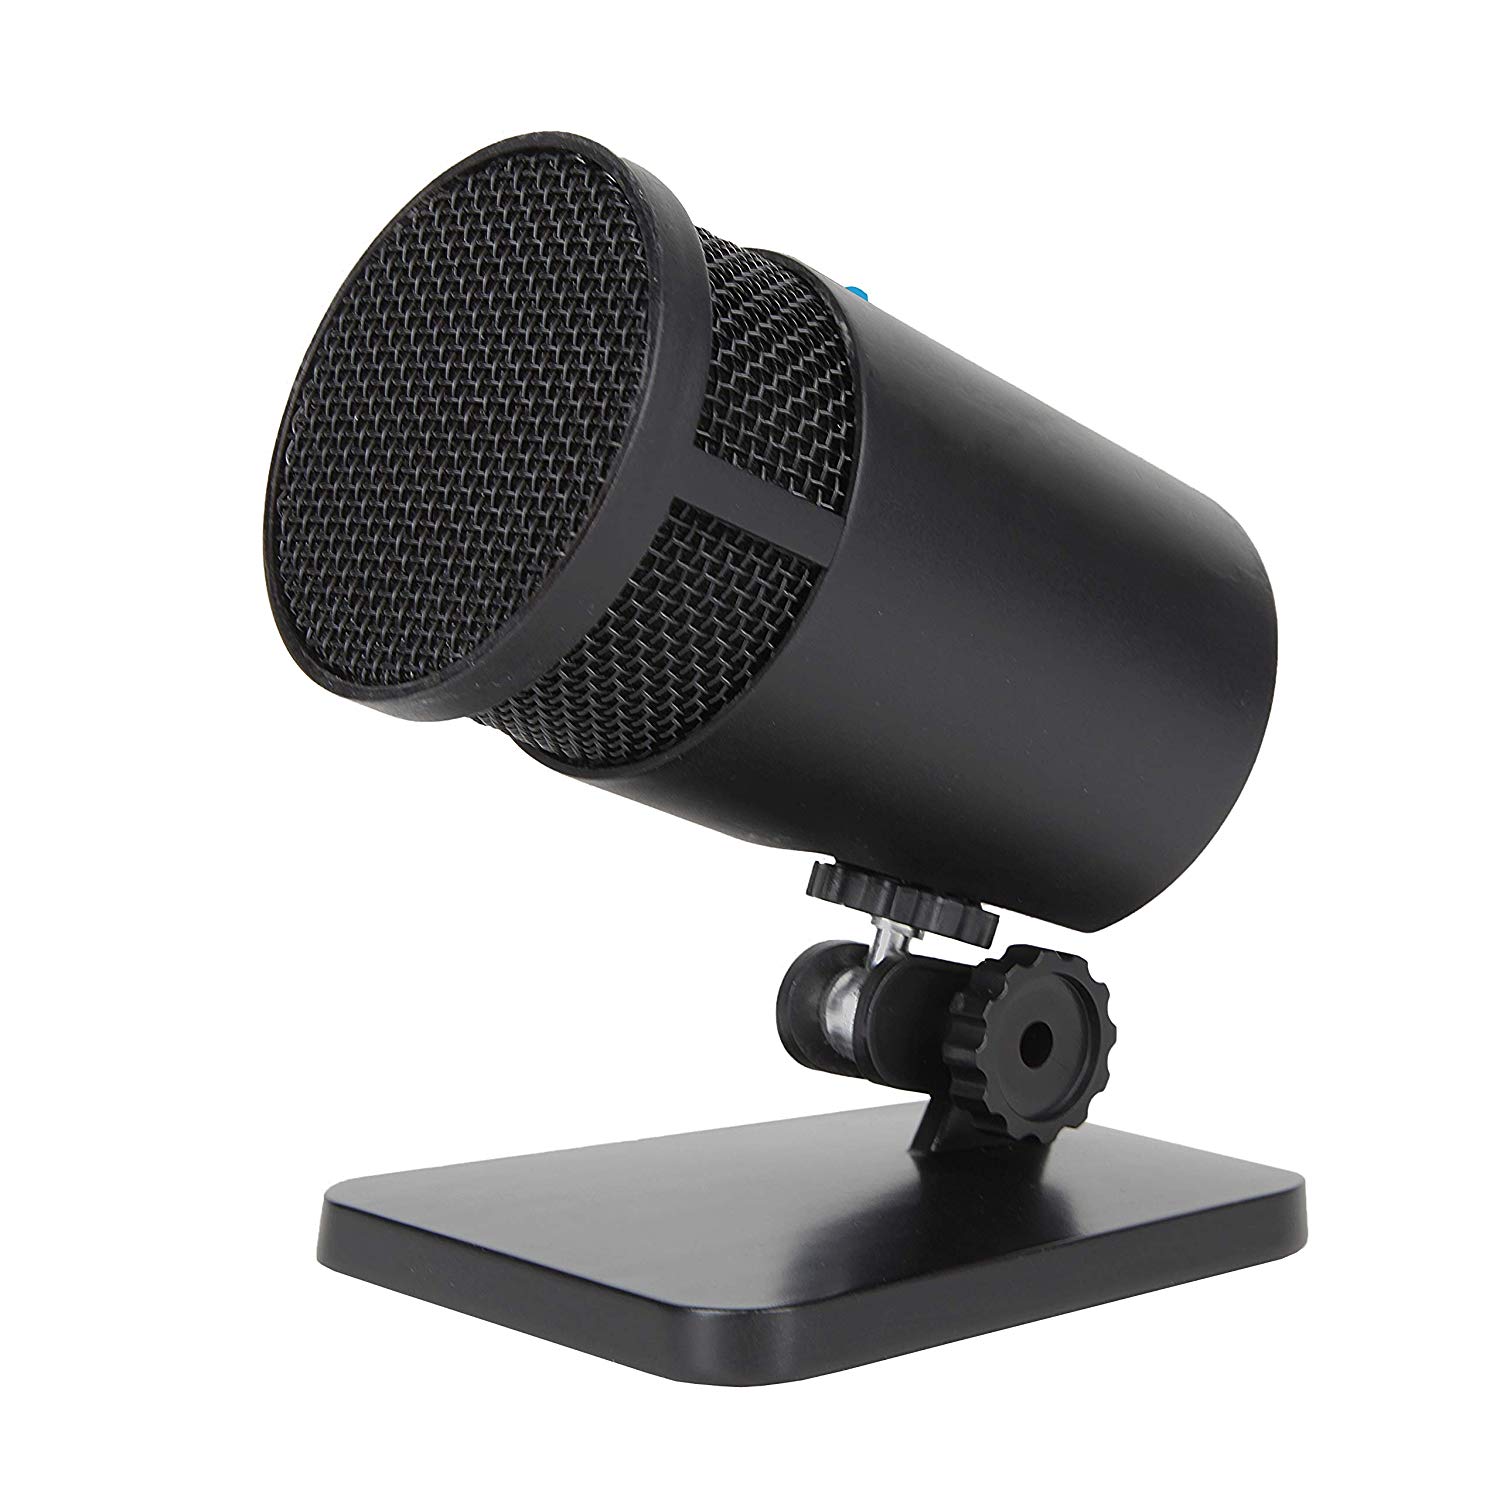 Cyber Acoustics USB Condenser Microphone for Podcasts, Gaming, Vocal, Music, Studio and Computer Recordings - Mic compatible with PC and Mac - Cardioid/Directional Recording Pattern (CVL-2001)